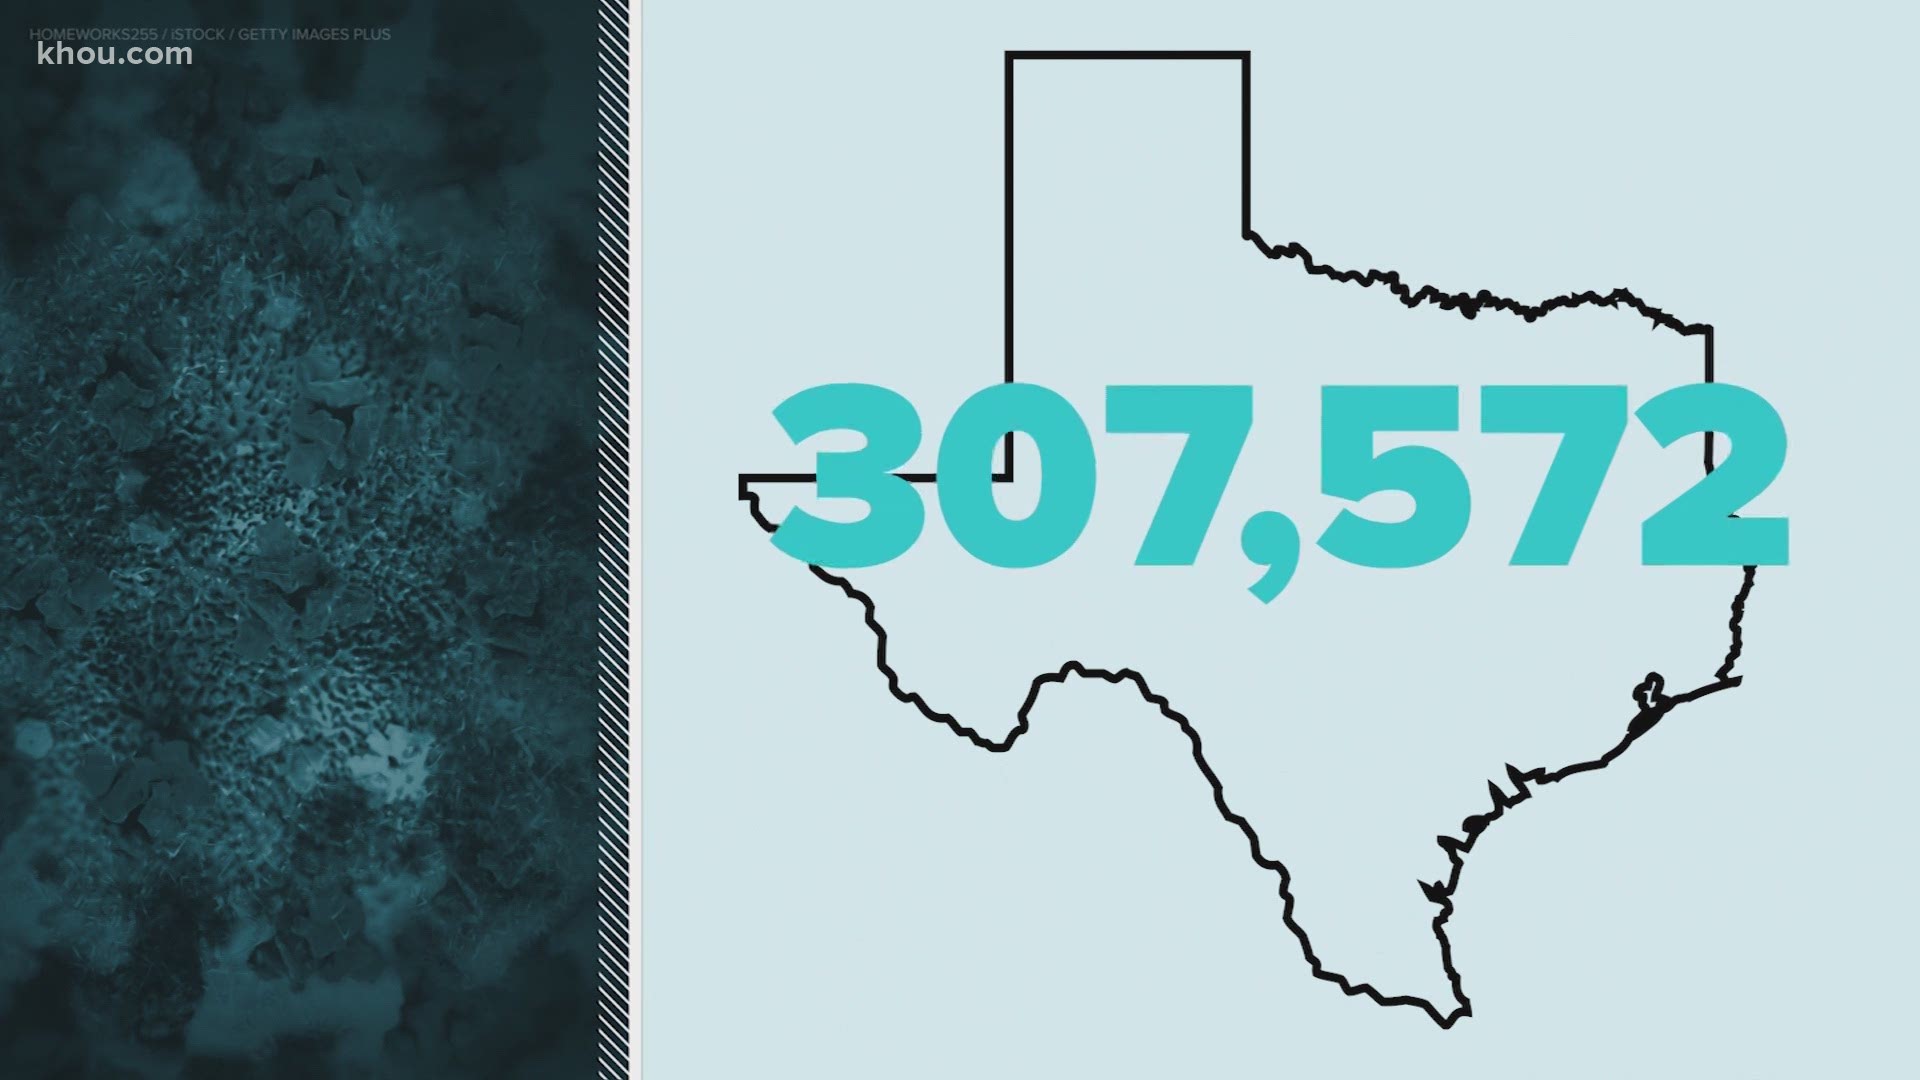 Texas Department of State Health Services announced a new high of COVID-19 deaths reported in a single day on Friday with 174.